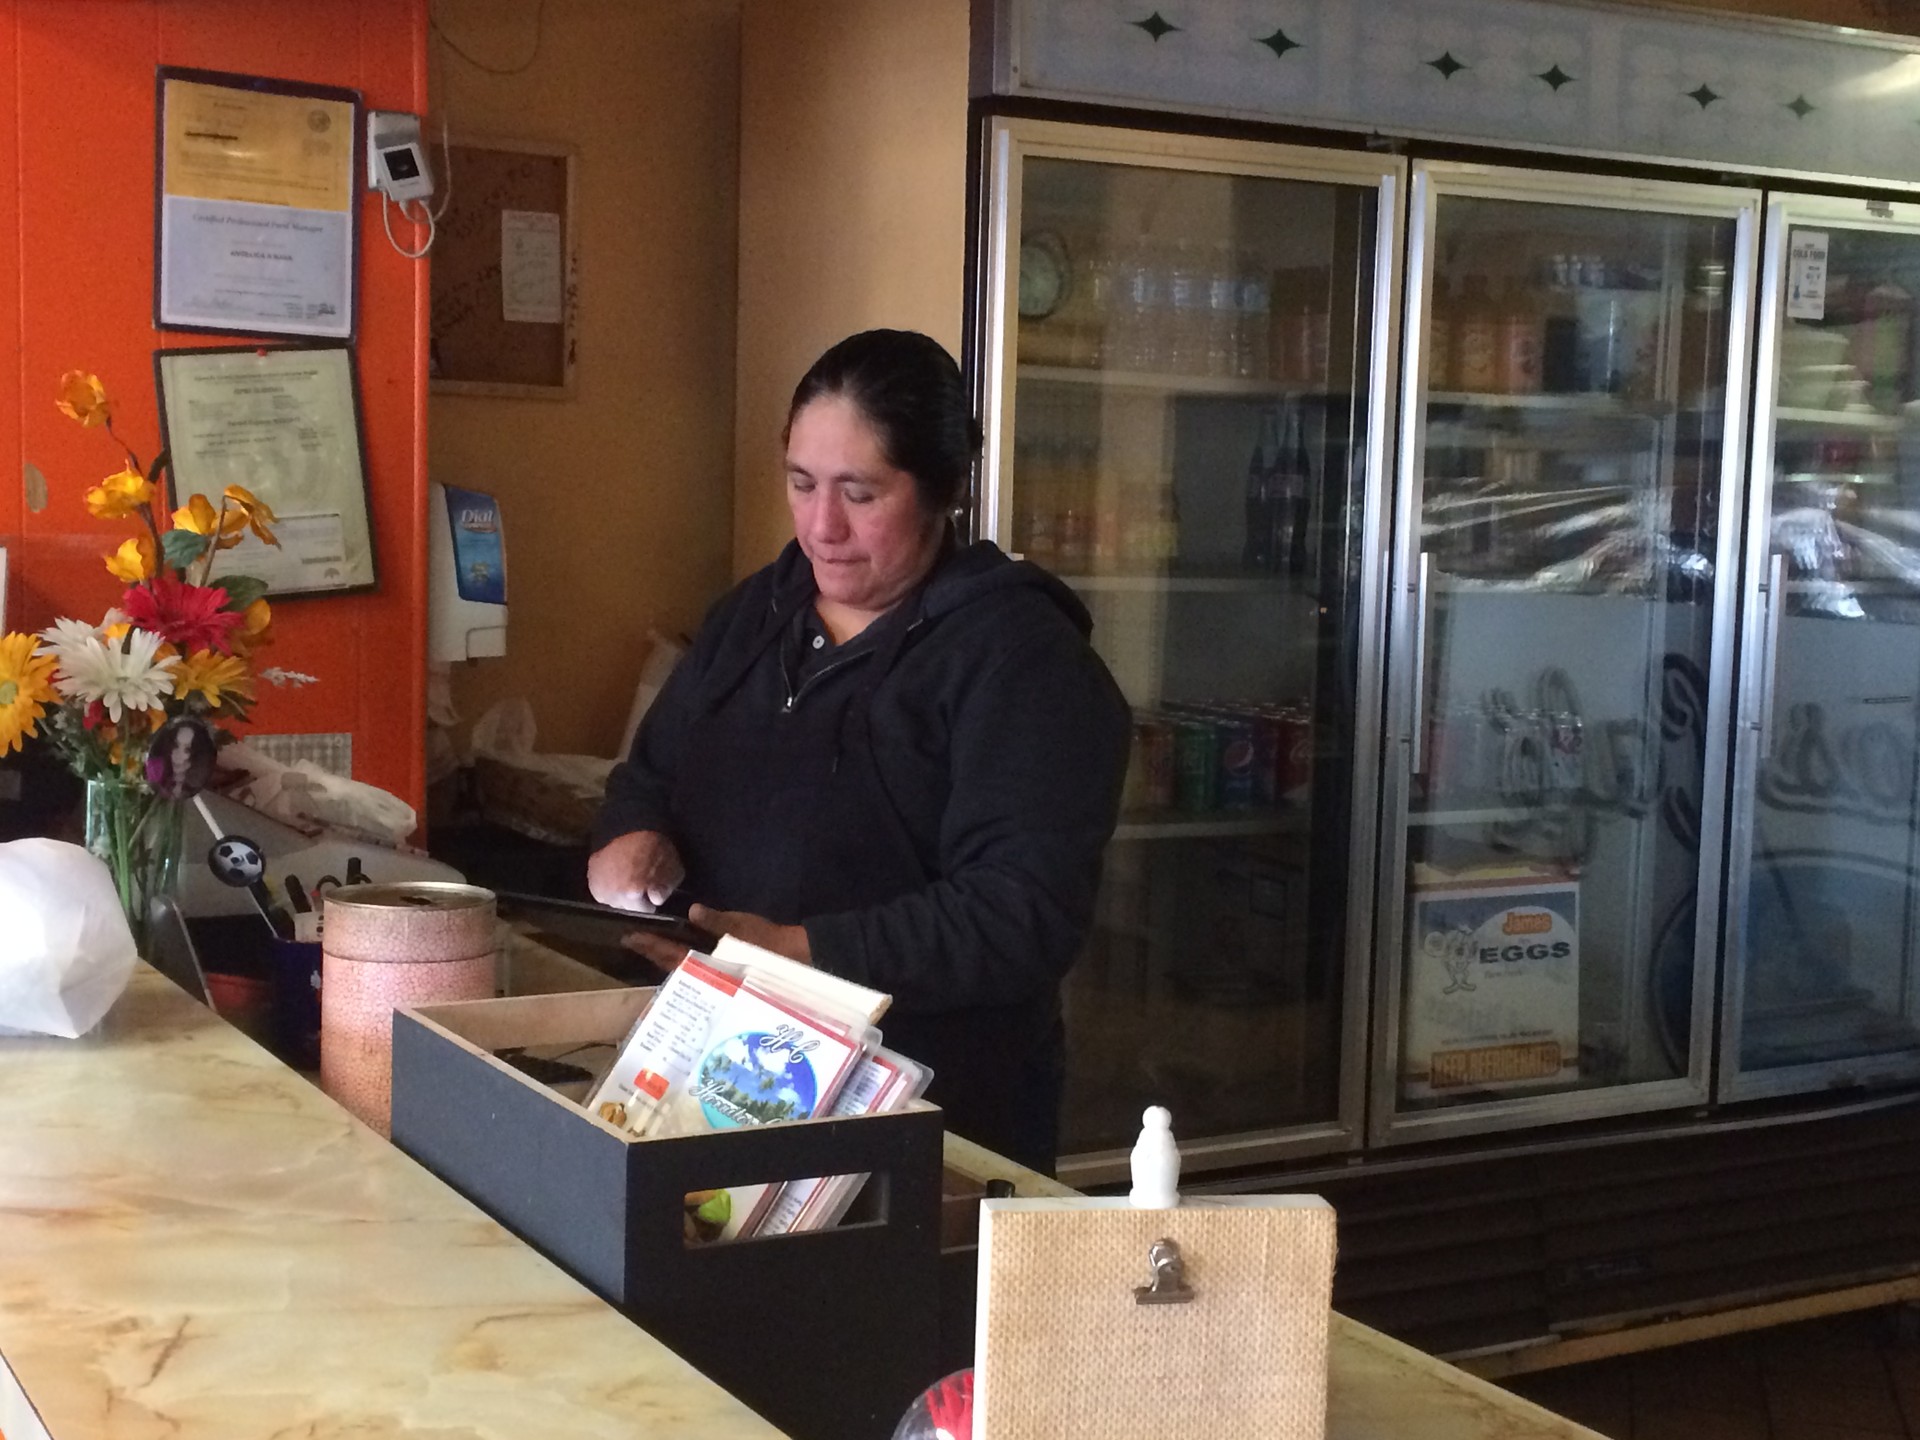 Edith Gallegos works the register at Hornitos Cafe, blocks away from the Ghost Ship warehouse fire. Gallegos said her clientele plummeted during recovery efforts at the fire site, which closed nearby streets.